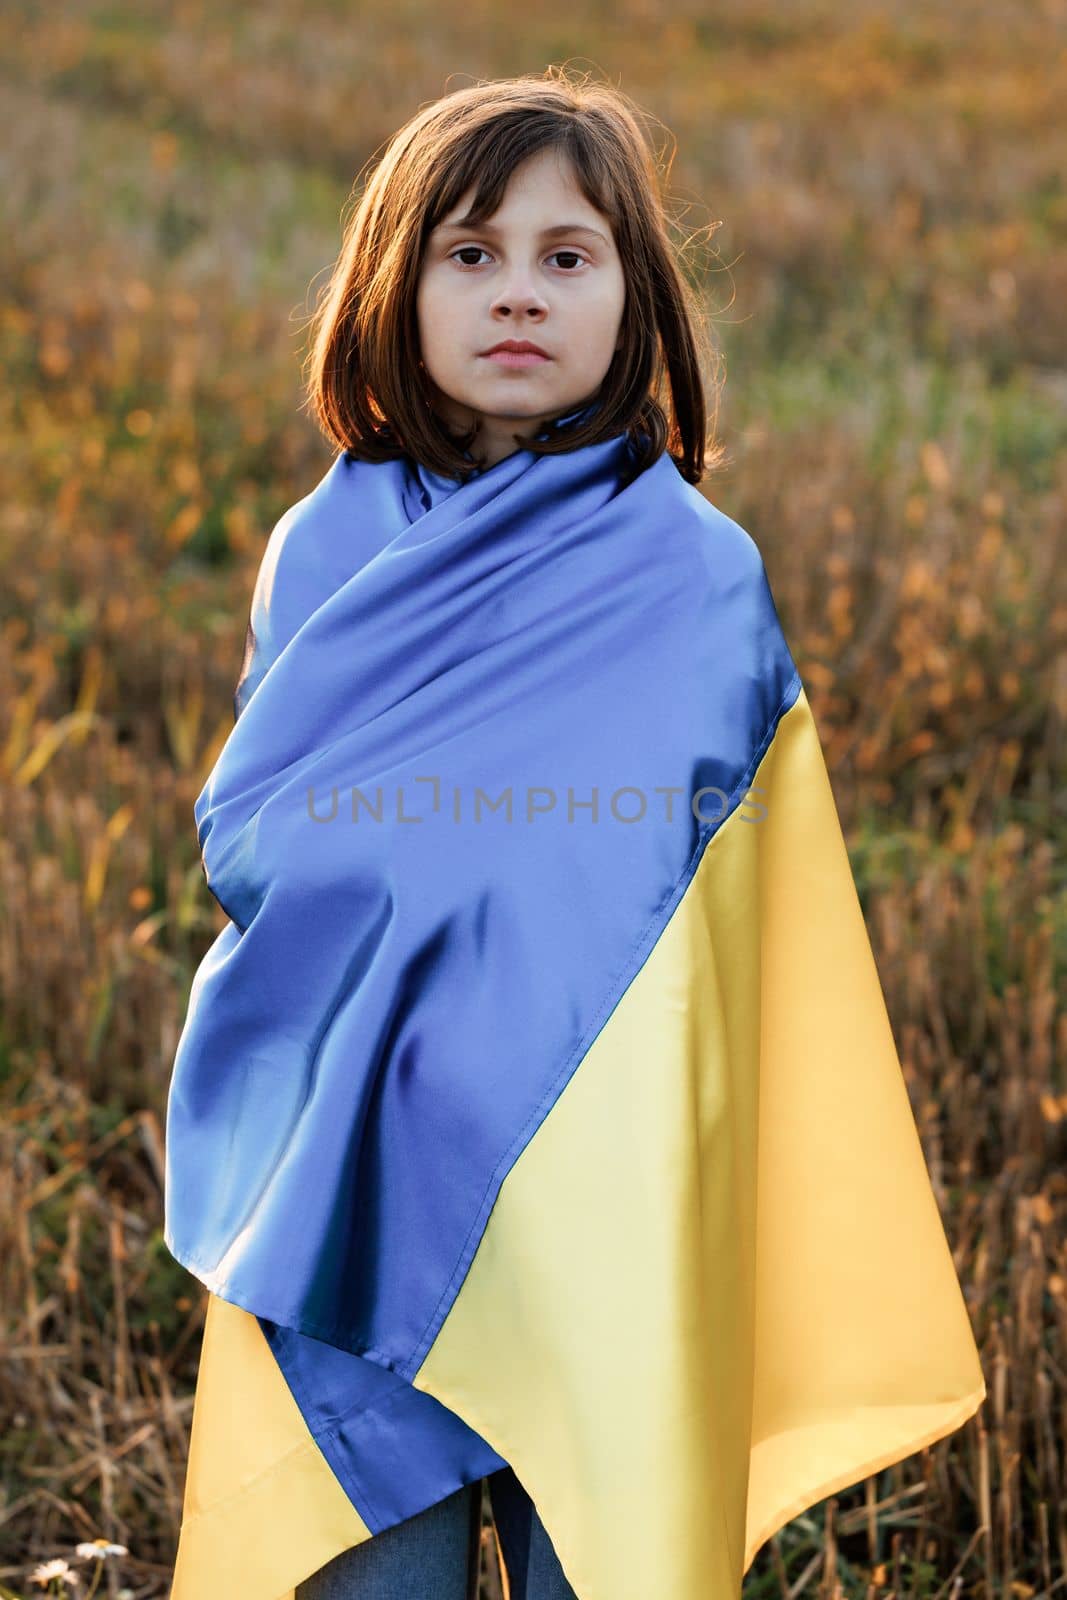 Portrait of Sad Ukrainian girl stands with a flag of Ukraine in the middle of field against a sunset sky. 8 years old girl holding the flag of Ukraine. War in Ukraine. Support for Ukraine.